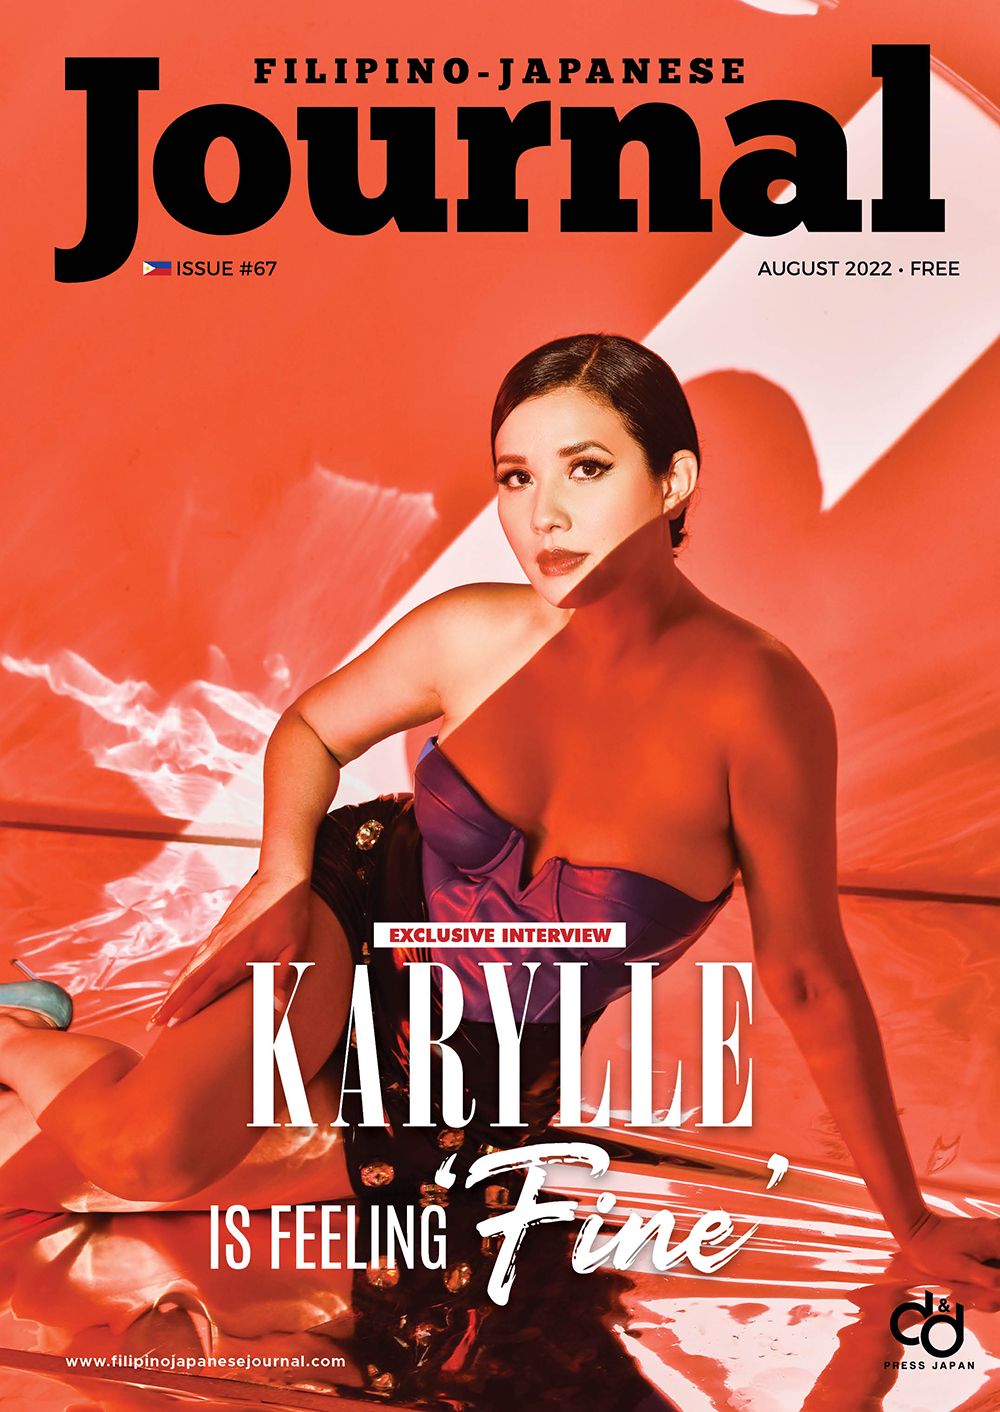 Karylle Feels ‘Fine’ as She Fronts Filipino-Japanese Journal for Fourth Time